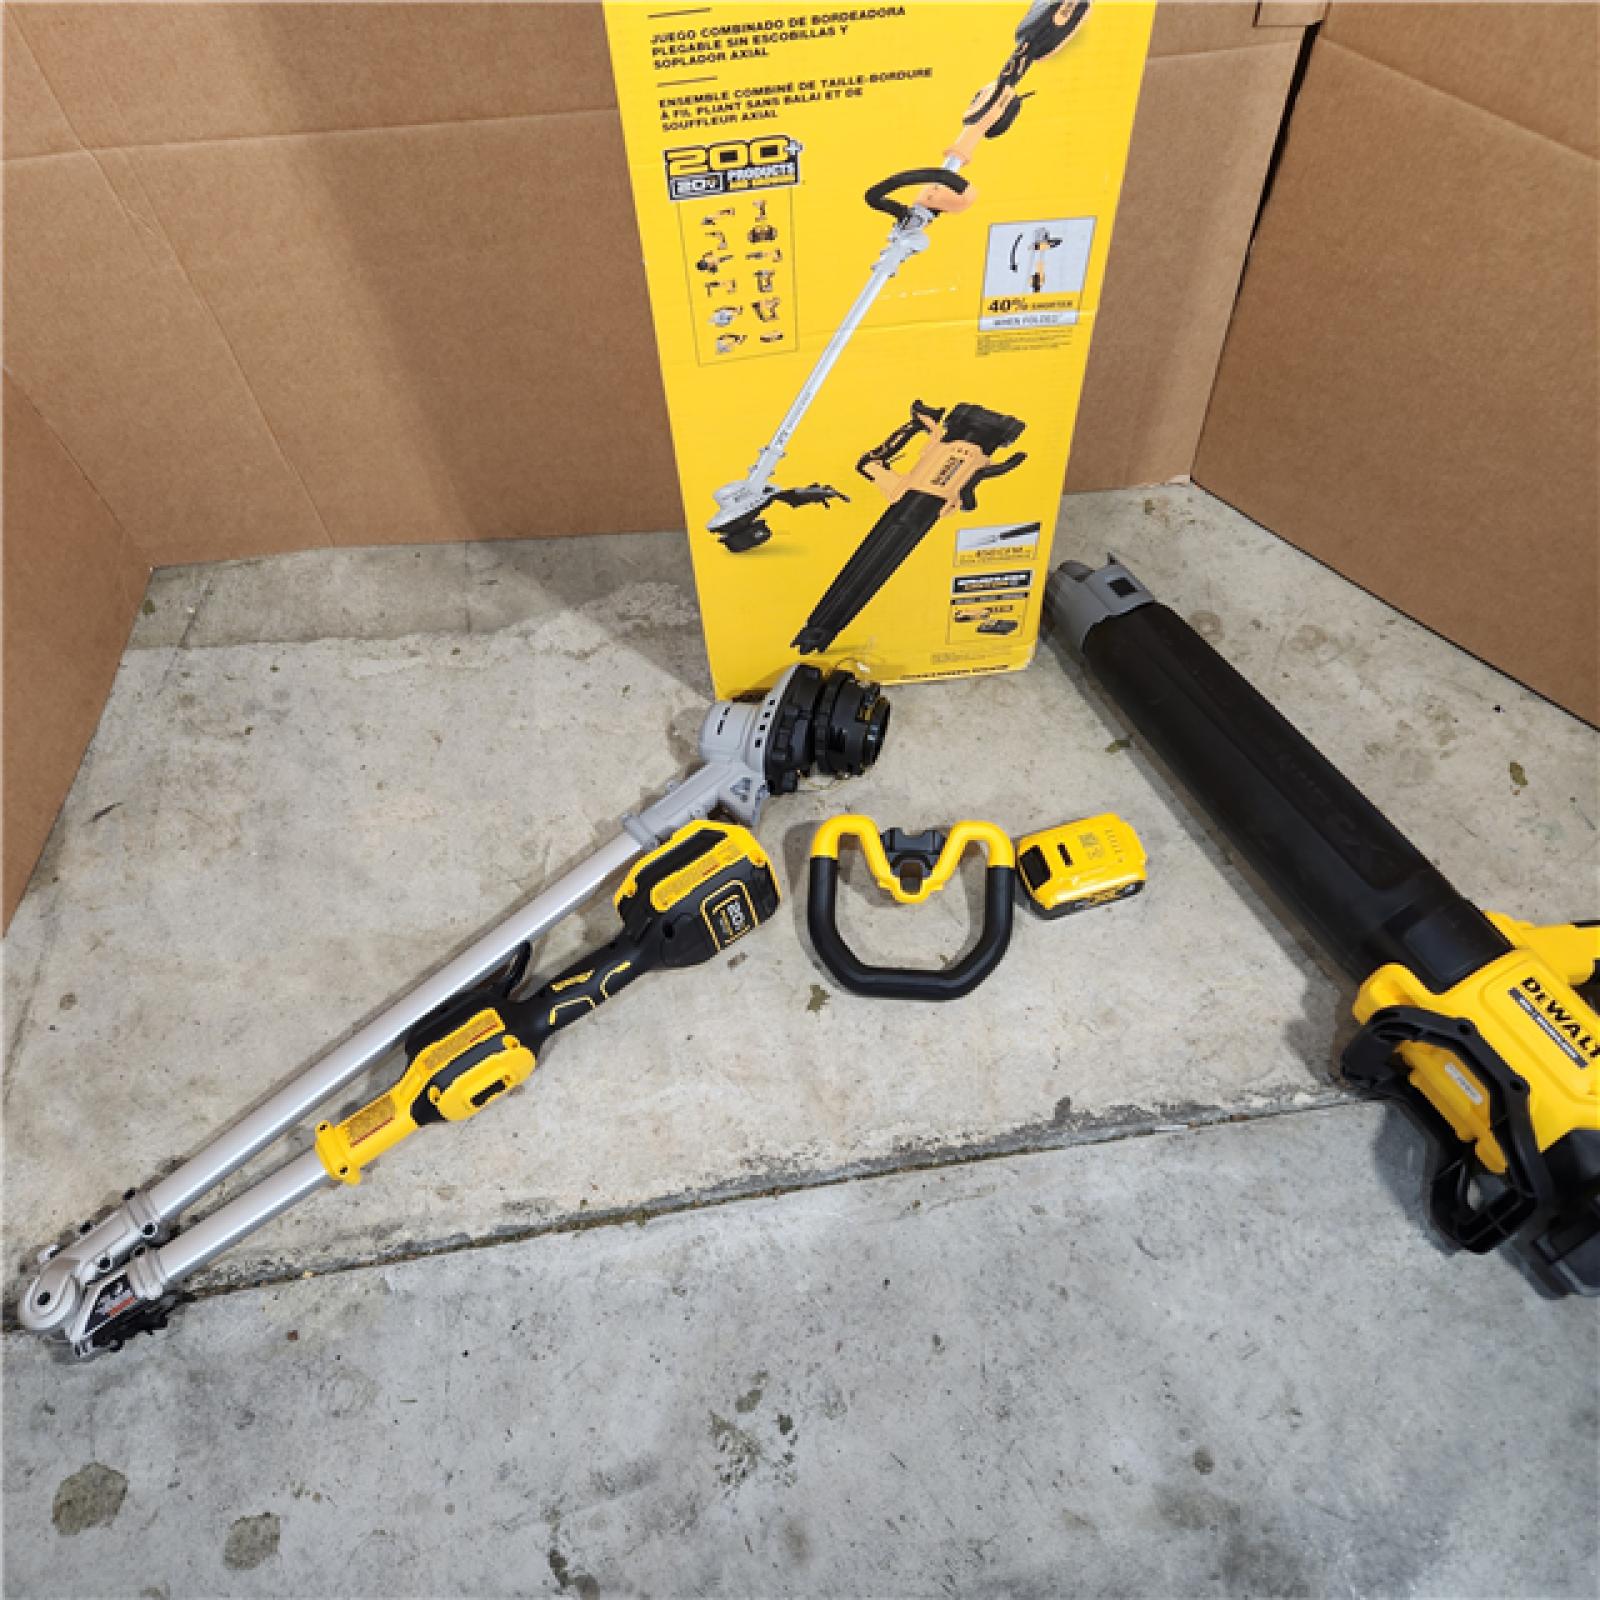 Houston location- AS-IS DEWALT 20V MAX Cordless Battery Powered String Trimmer & Leaf Blower Combo Kit with (1) 4.0 Ah Battery and Charger